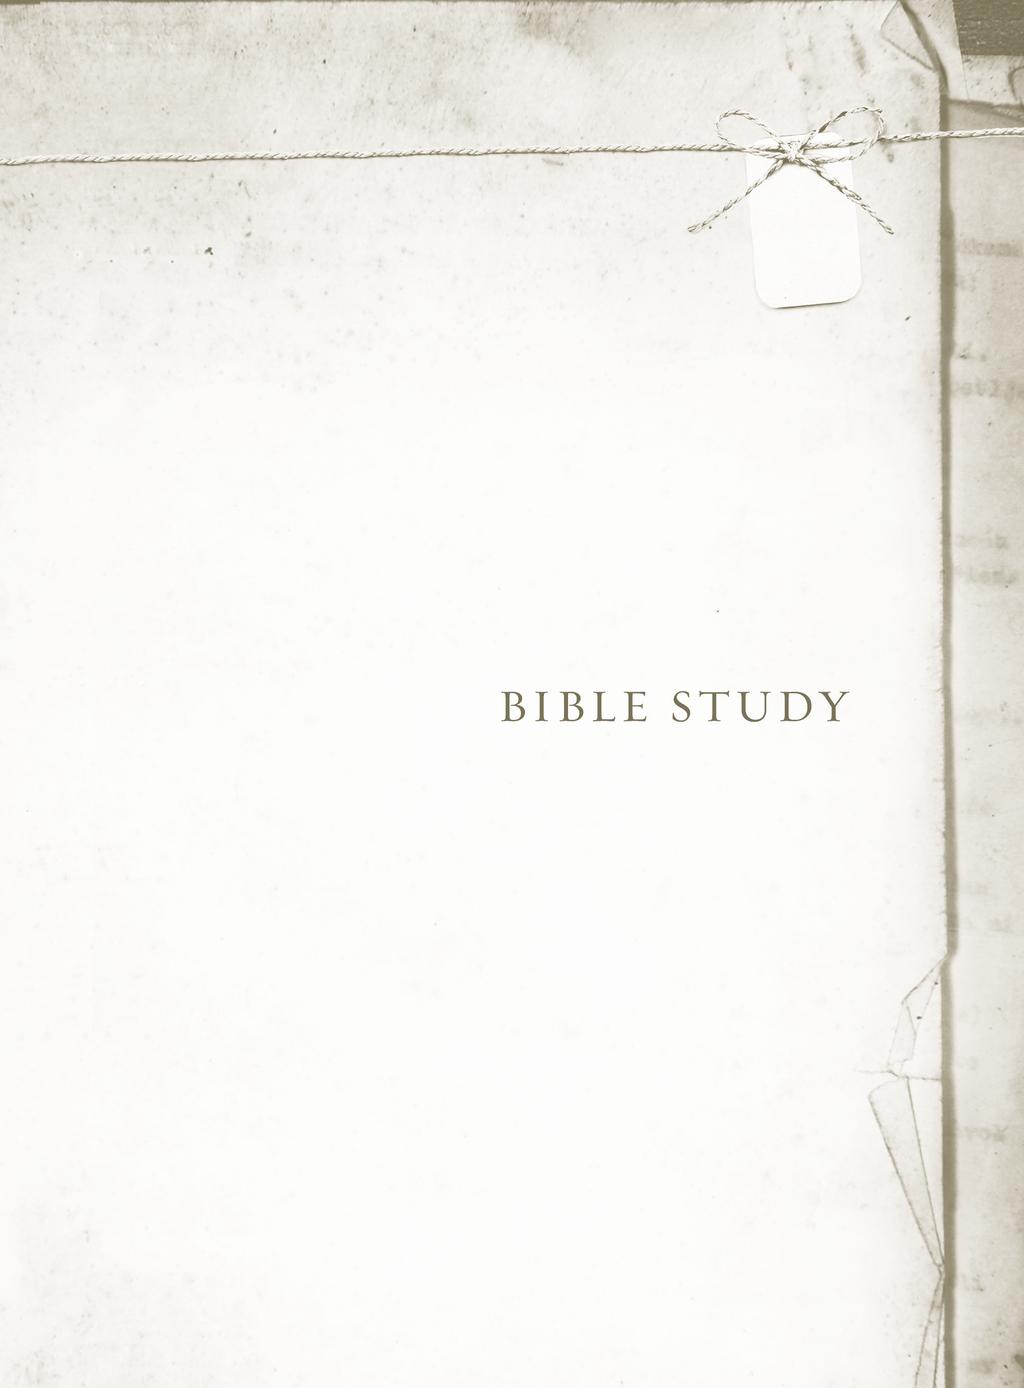 Viewer Guides. The Family of Jesus Bible Study. Published by LifeWay Press. 2014 Karen Kingsbury.